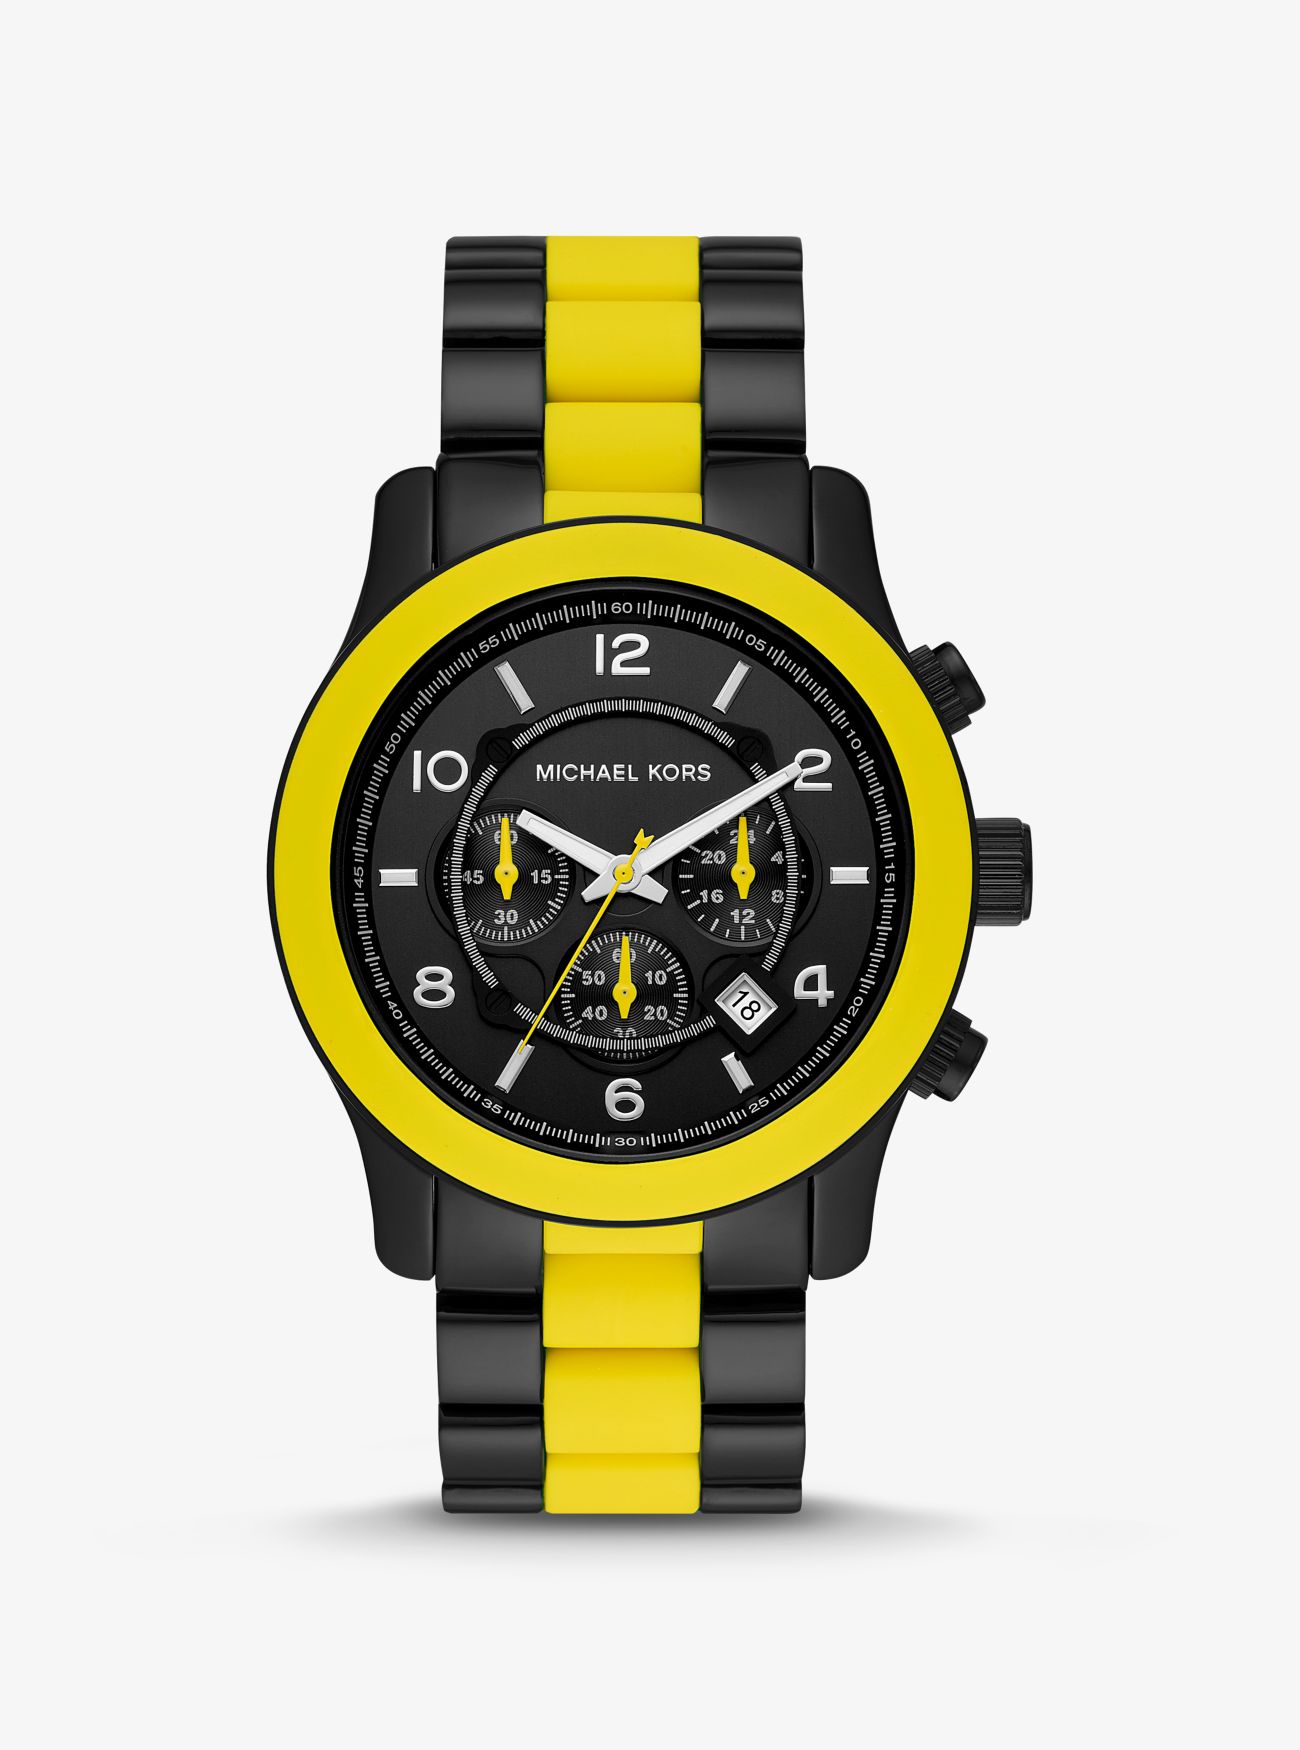 MICHAEL KORS Oversized Runway Black-Tone and Silicone Watch